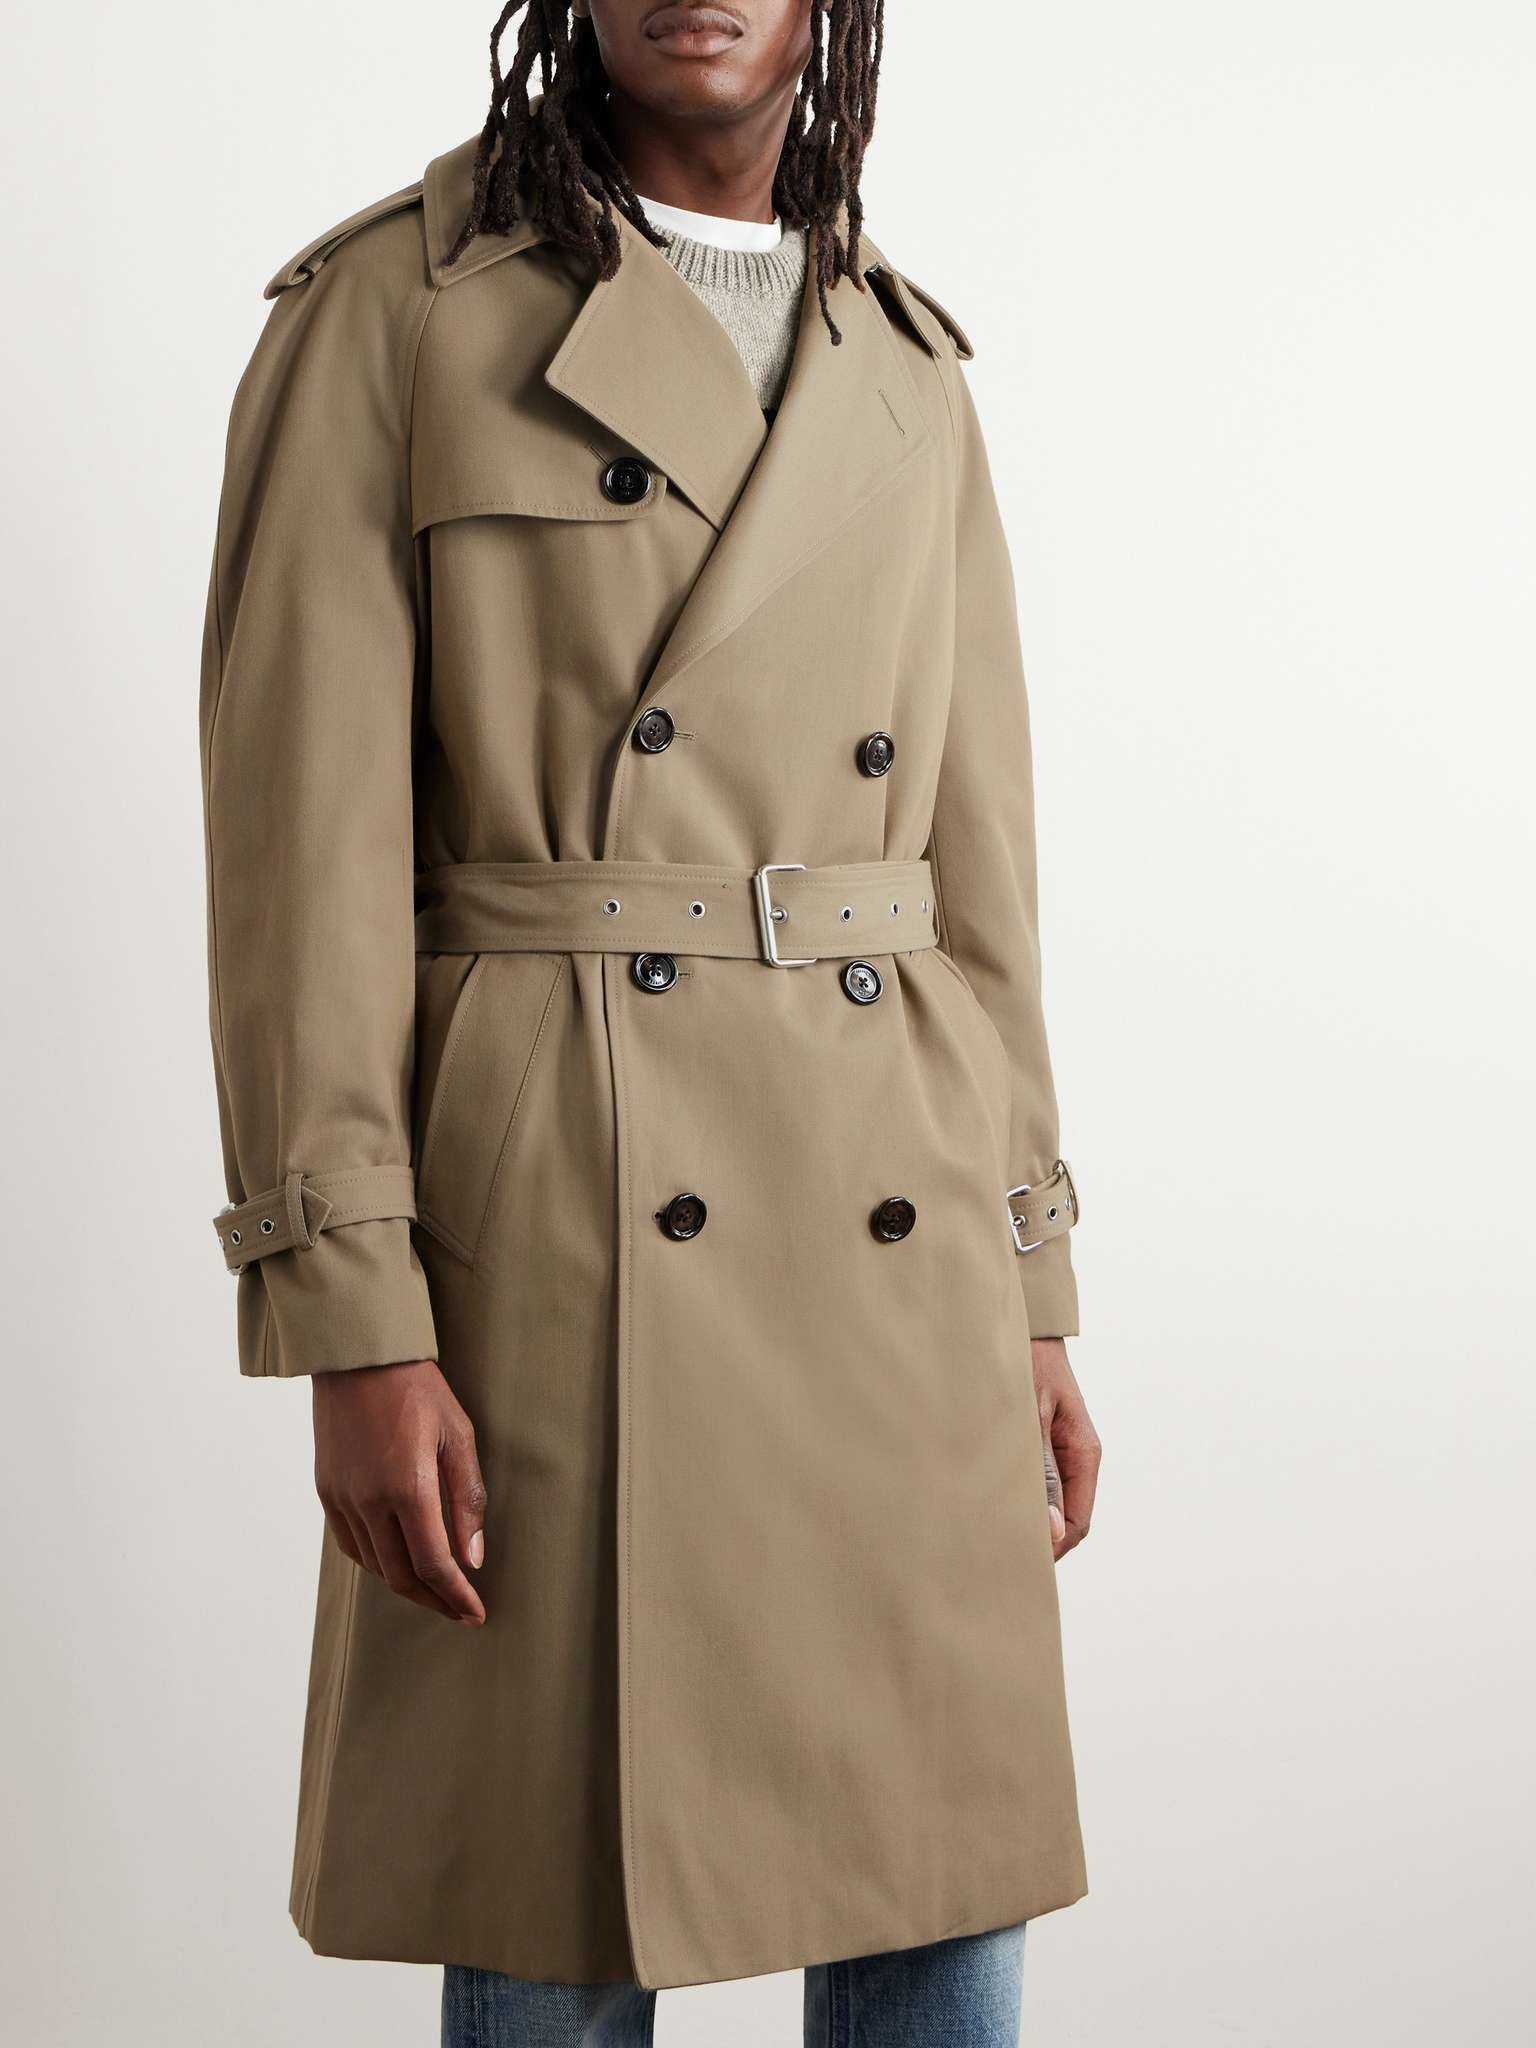 CELINE HOMME Double-Breasted Wool and Cotton-Blend Gabardine Trench Coat  for Men